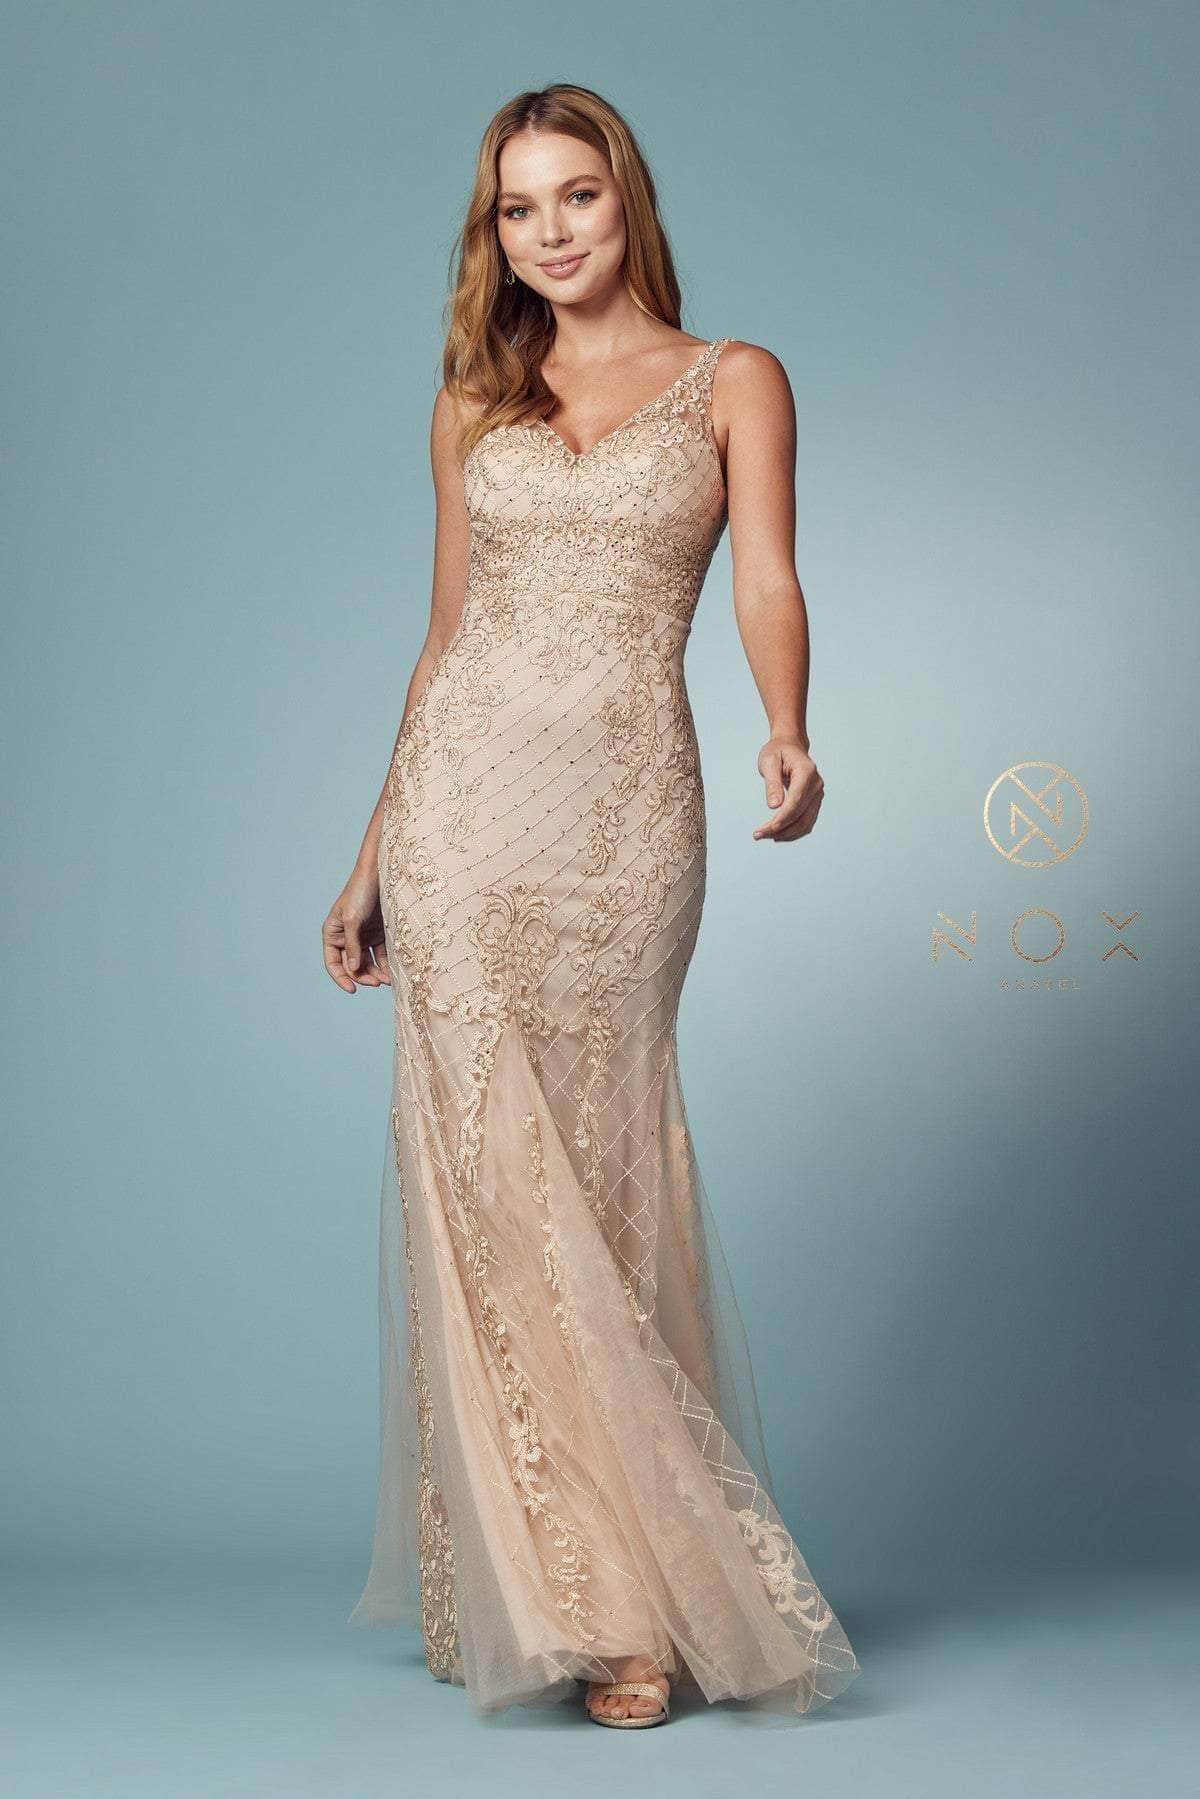 Nox Anabel - A398 Sleeveless V Neck Beaded Lace Applique Trumpet Gown Evening Dresses 4 / Gold